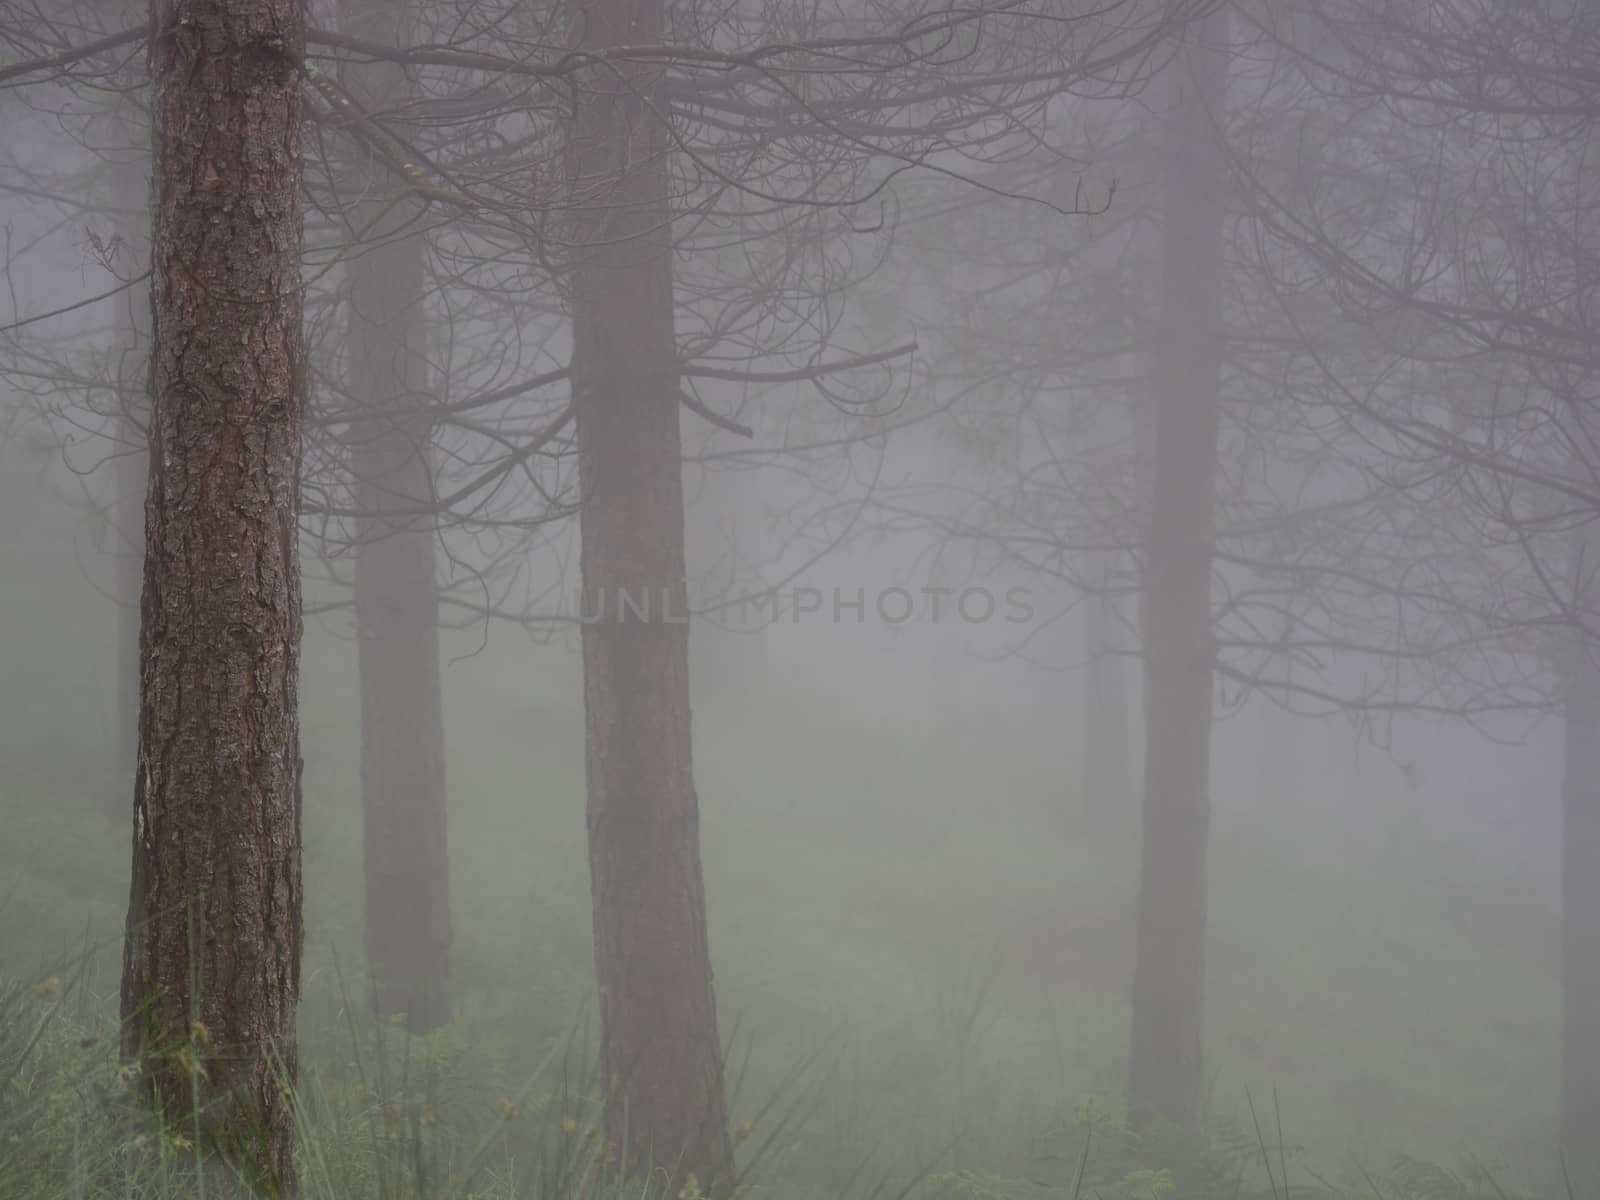 forest landscape in autumn with fog by jmagfoto